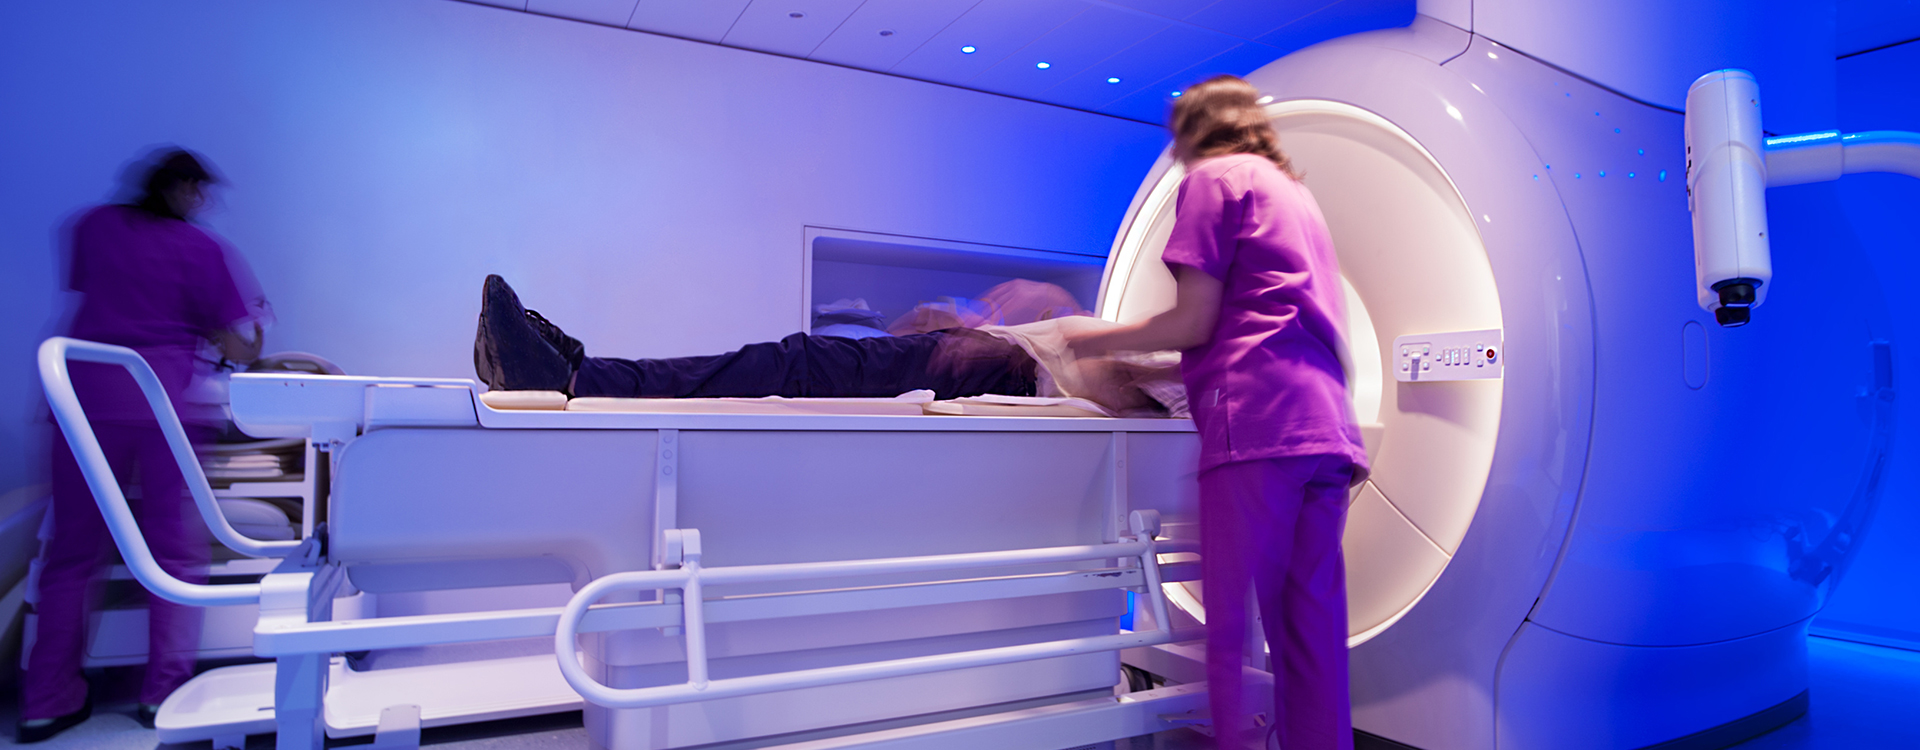 Dosimetrist placing patient's arms by their side as CAT scan begins